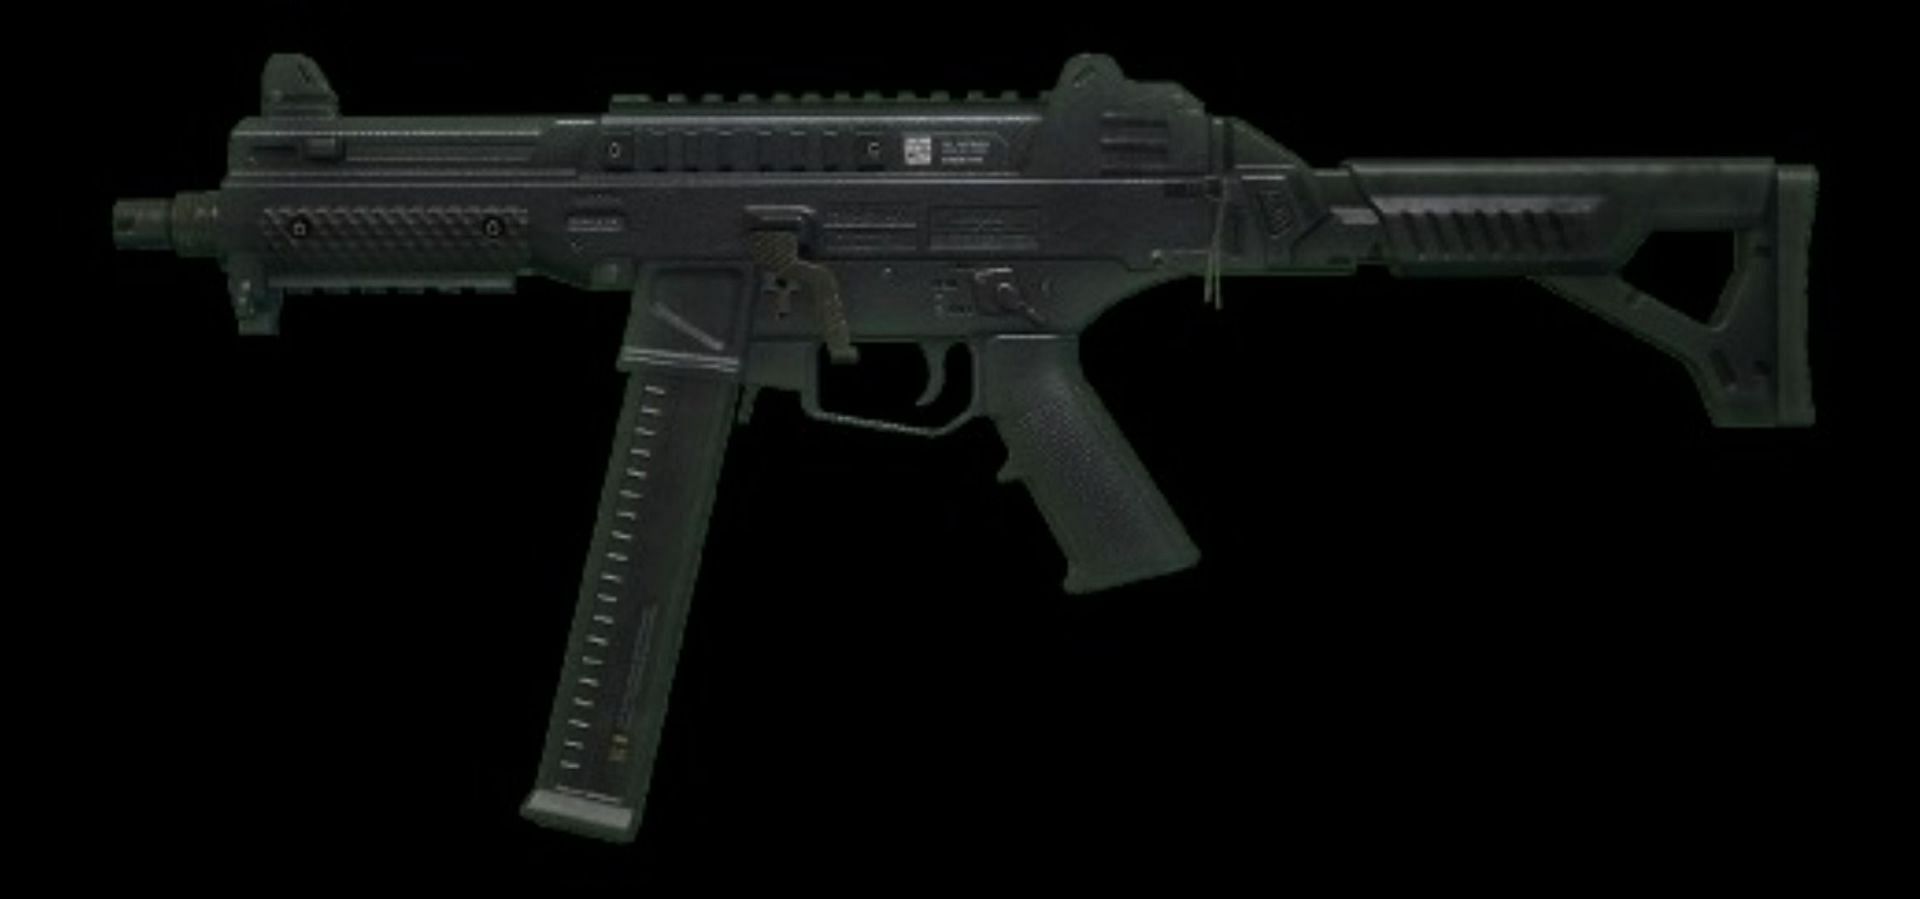 The UMP-45 from COD: Modern Warfare 2 (Image via Activision)